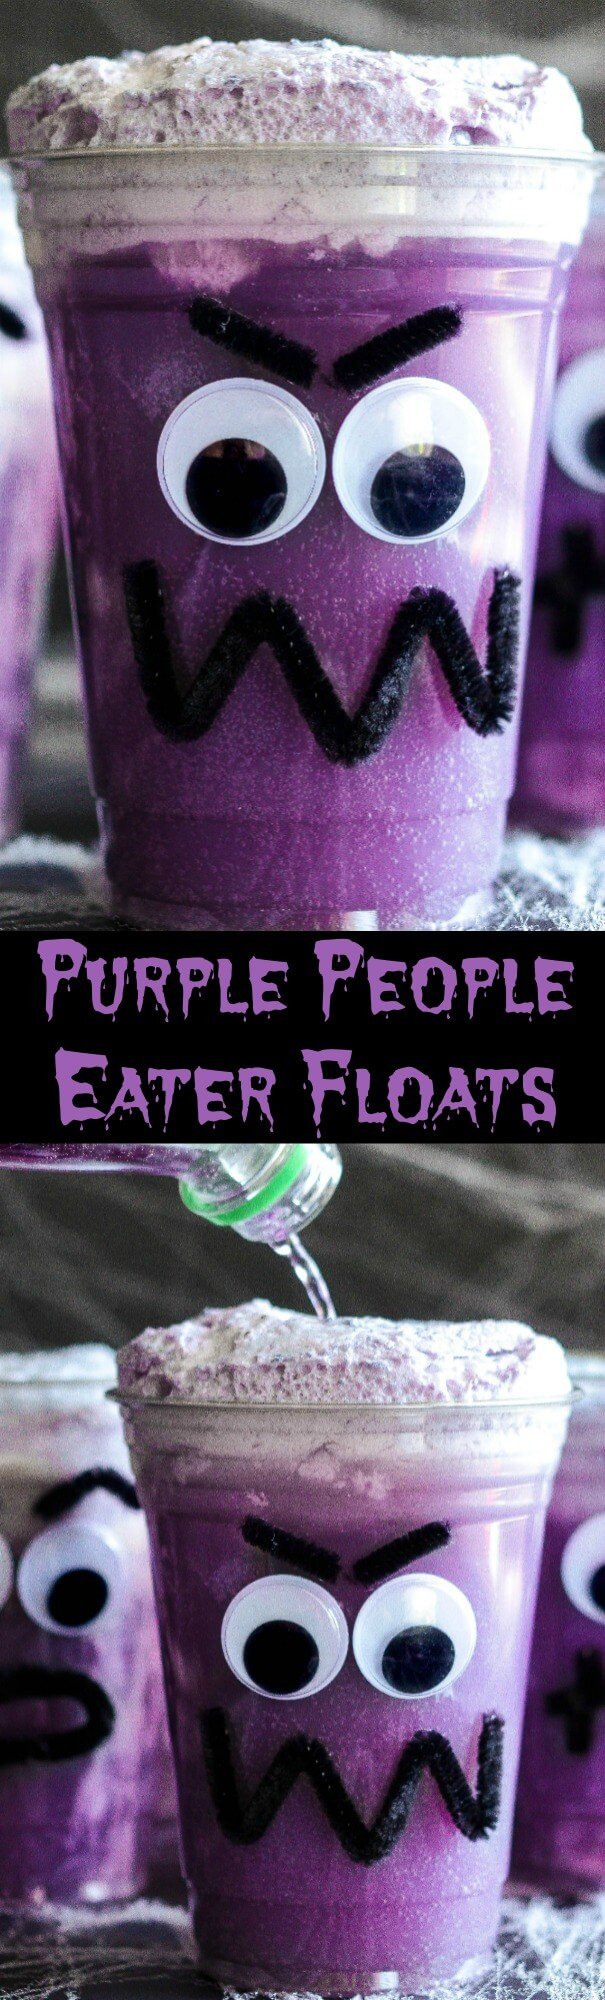 Purple People Eater Floats! Create this fun Halloween treat with the kids with pipe cleaners, hot glue, plastic cups, vanilla ice cream and purple grape soda!